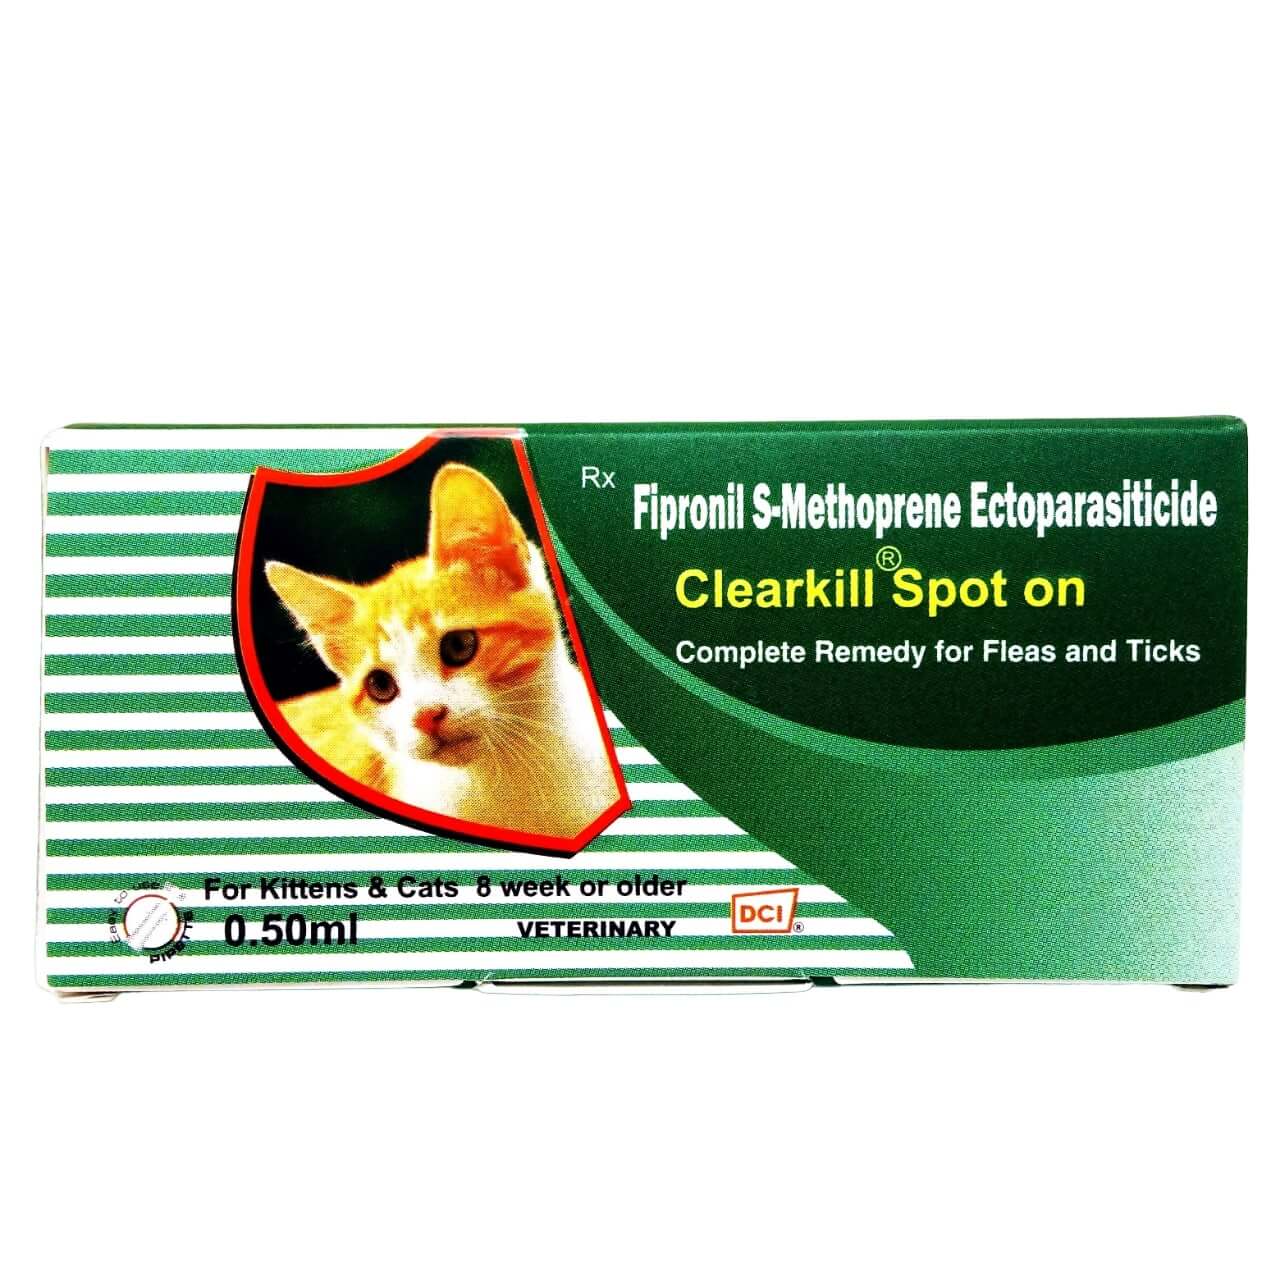 Clearkill Spot on for cats 0.50 ml, anti tick for cats